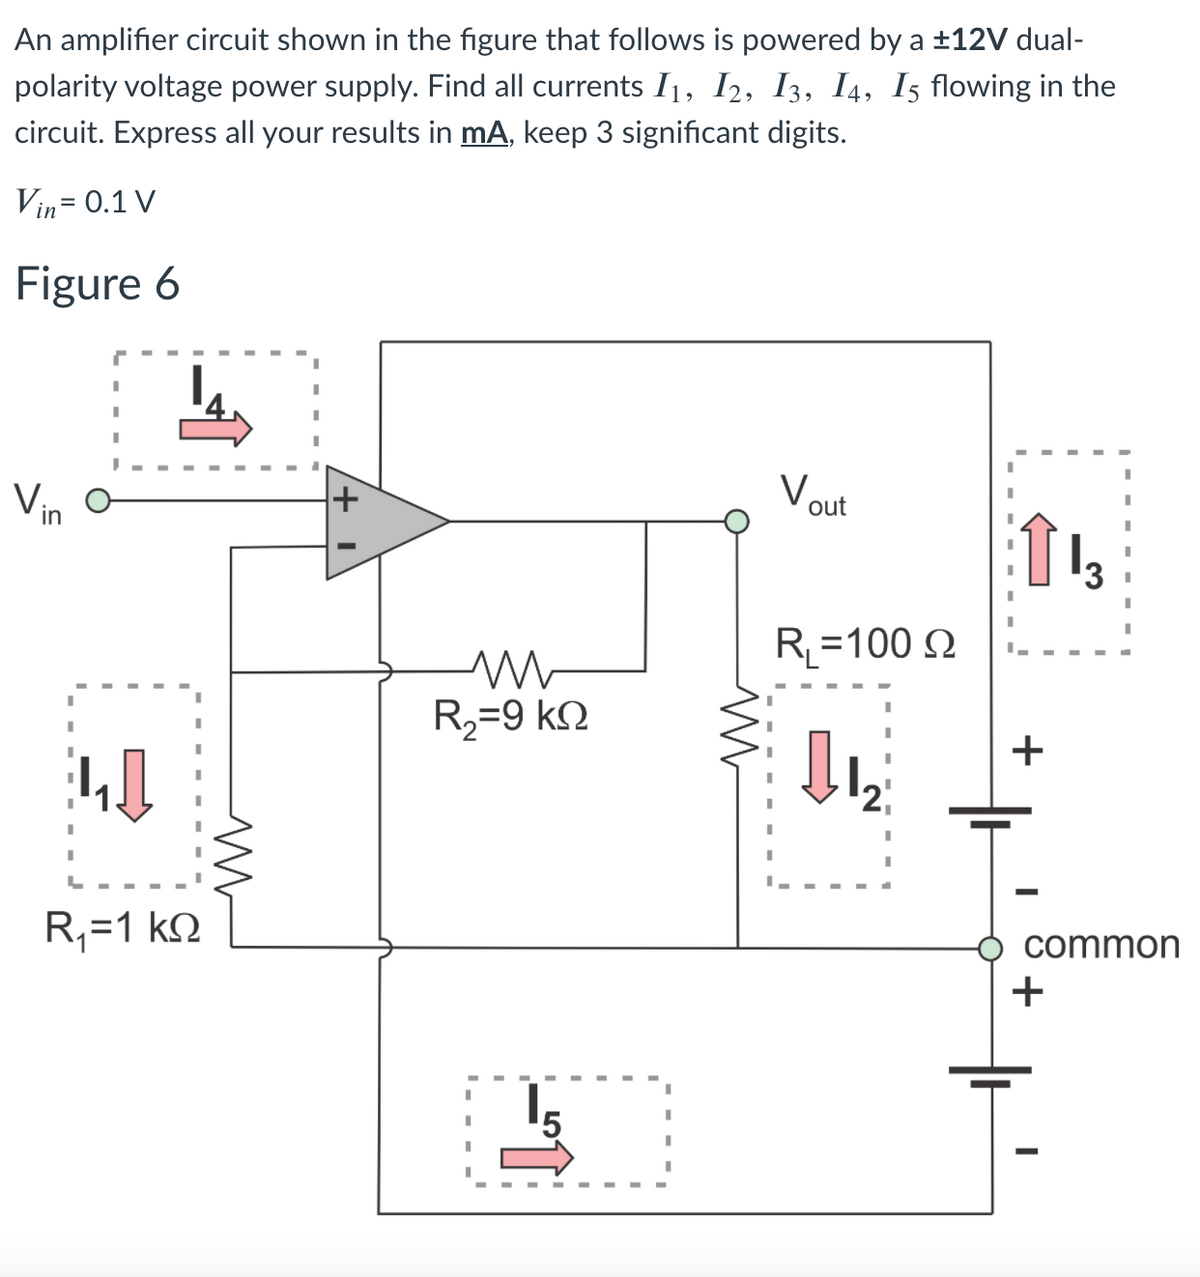 An amplifier circuit shown in the figure that follows is powered by a ±12V dual-
polarity voltage power supply. Find all currents I1, I2, I3, I4, I5 flowing in the
circuit. Express all your results in mA, keep 3 significant digits.
Vin= 0.1 V
Figure 6
Vin
Vout
R=100 N
R2=9 kN
+
R,=1 kN
common
15
